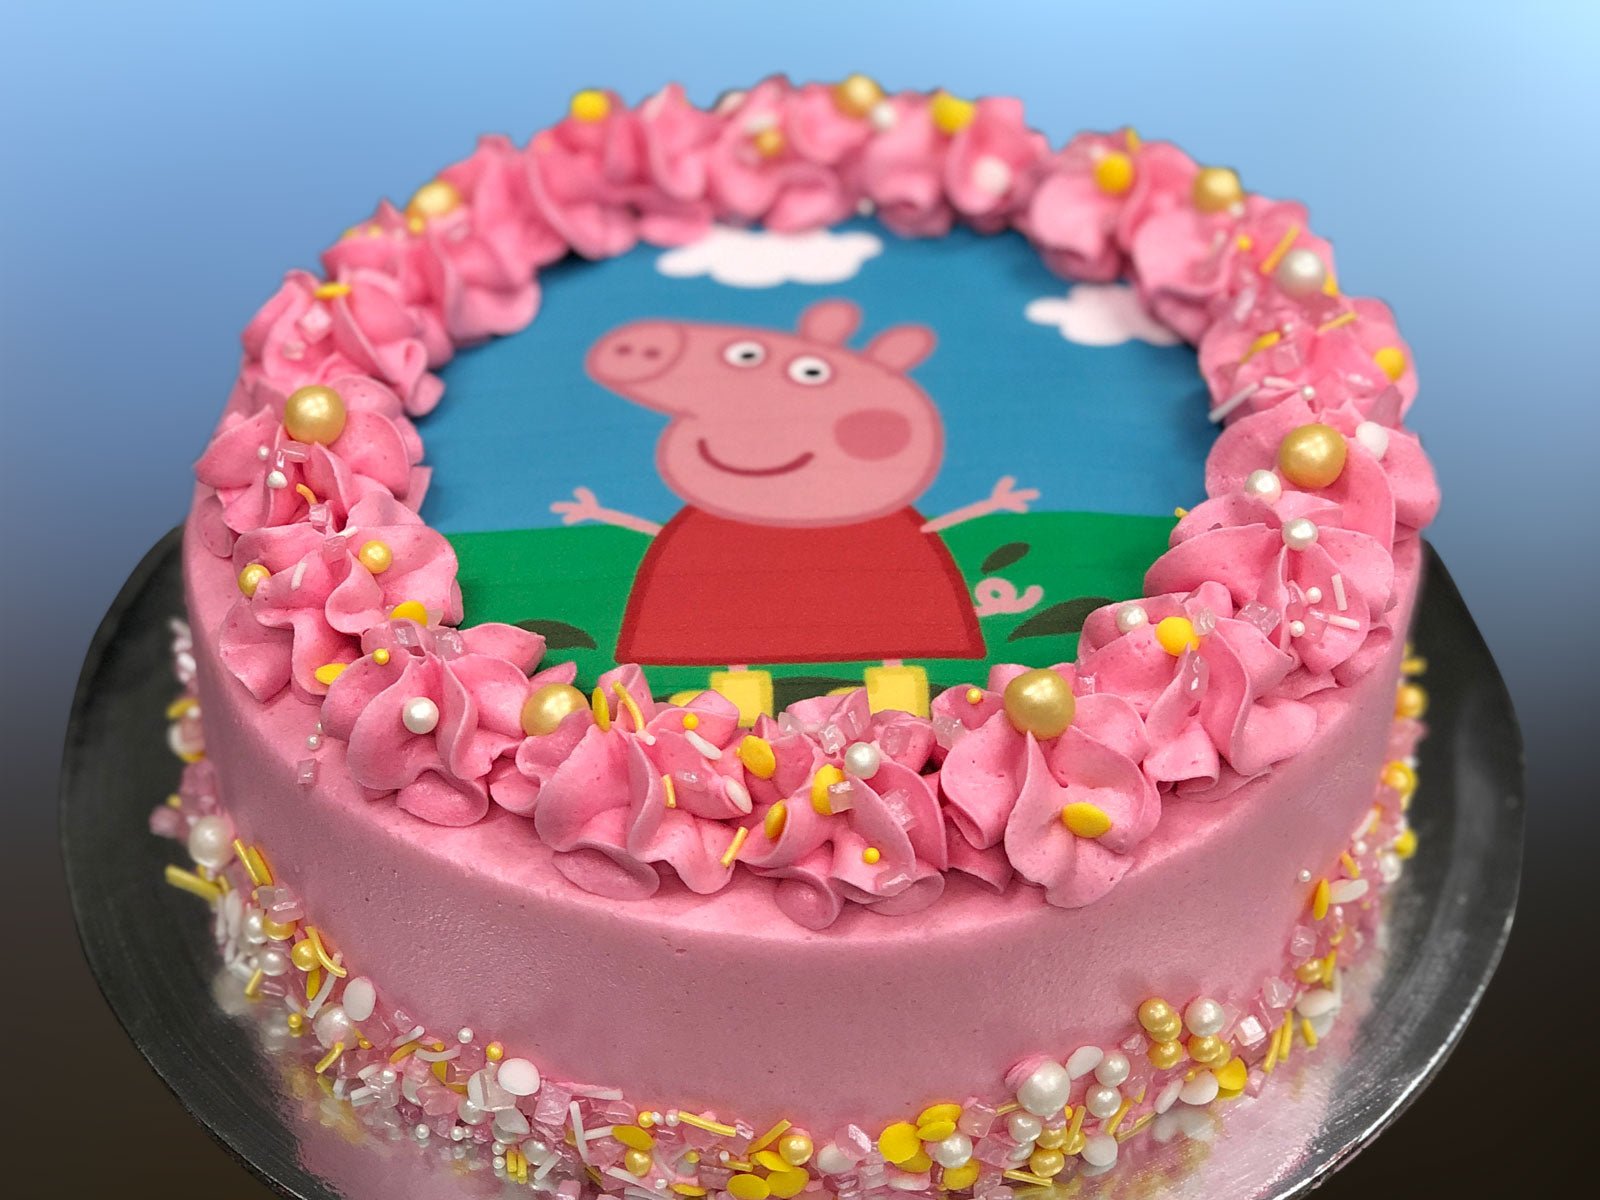 Polly Pig DIY cake kit – Clever Crumb